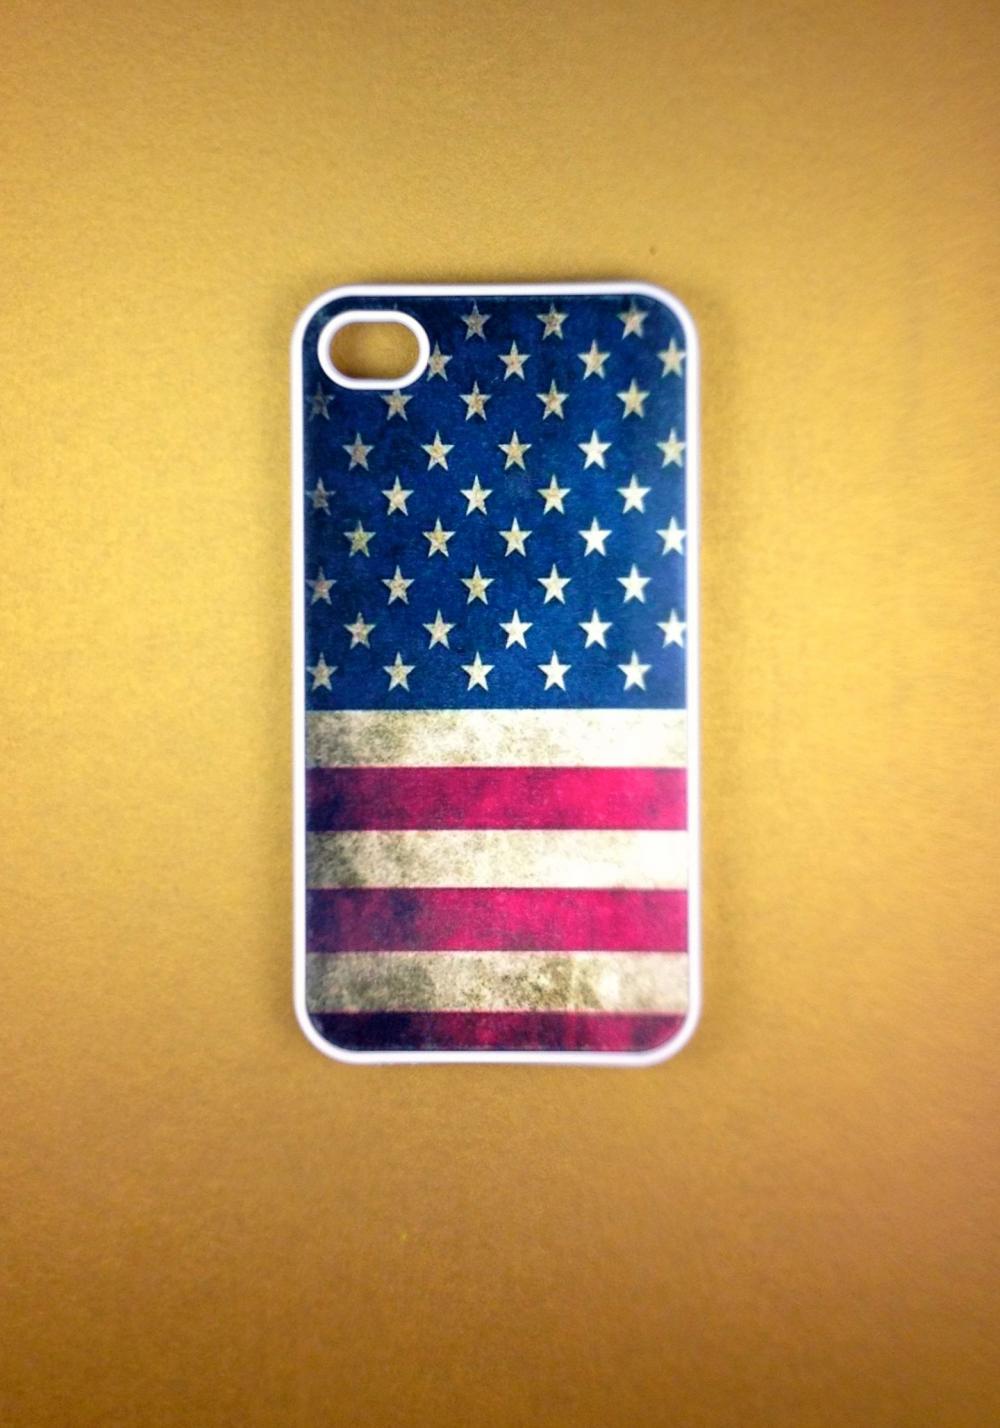 Iphone 4 Case - US Flag Iphone 4s Case, Iphone Case, Iphone 4 Cover